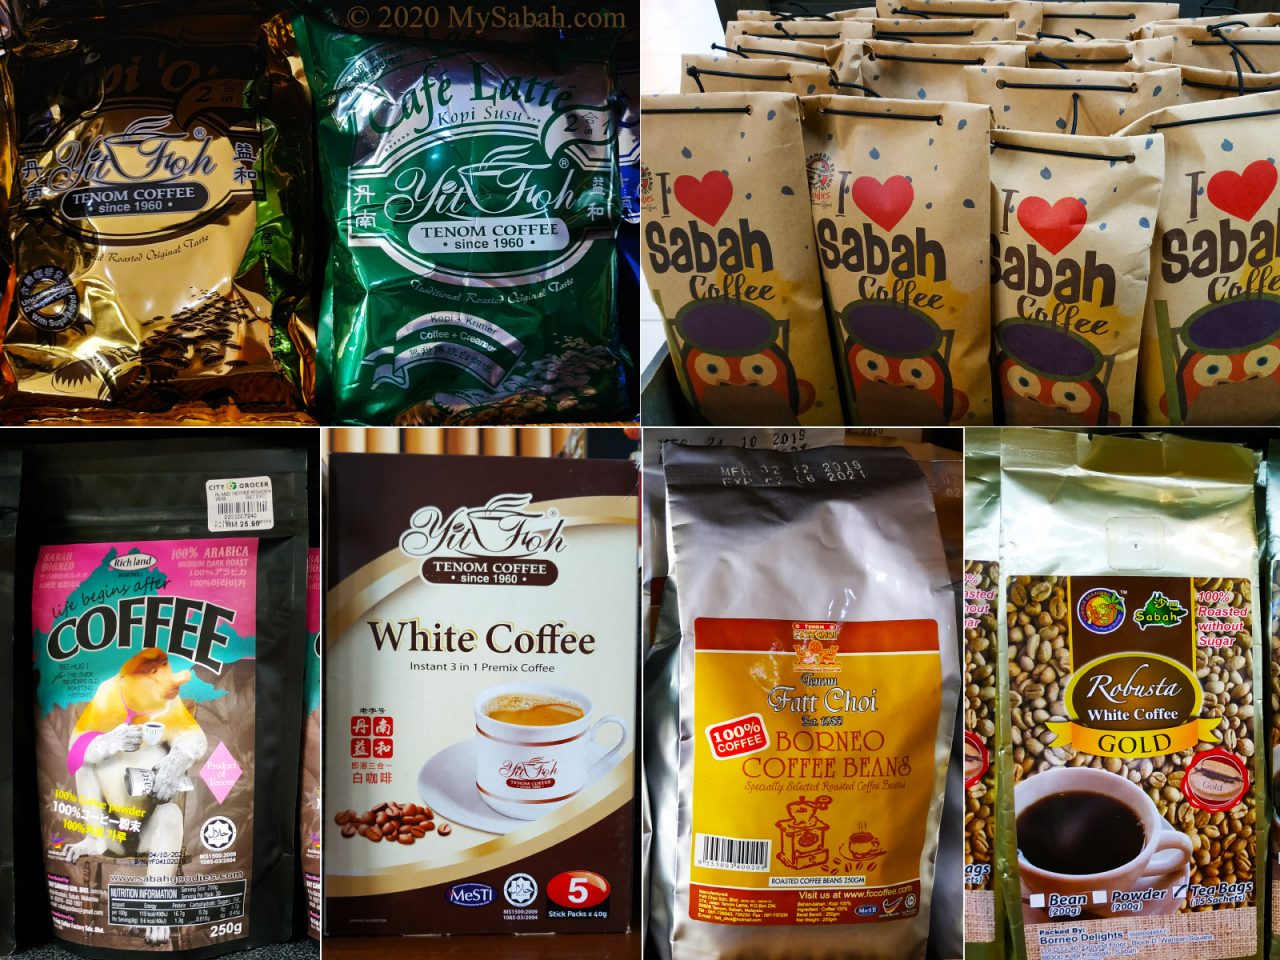 Tenom coffee in different packing